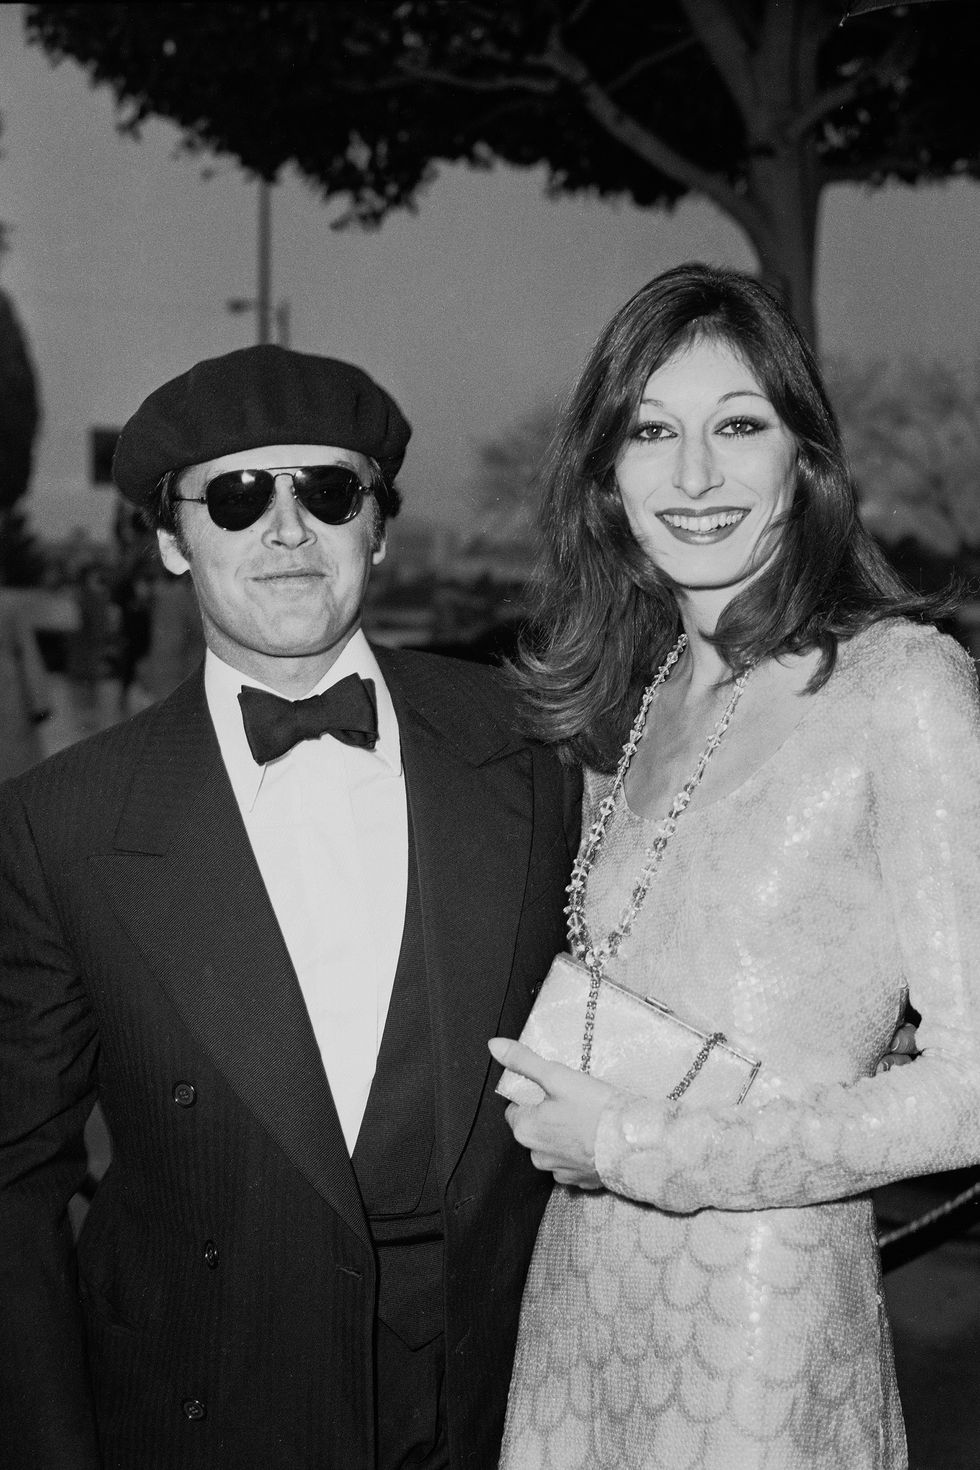 American actors Jack Nicholson and Anjelica Huston attend the Academy Awards ceremonies together, Los Angeles, California, March 29, 1976. (Photo by Fotos International/Getty Images)